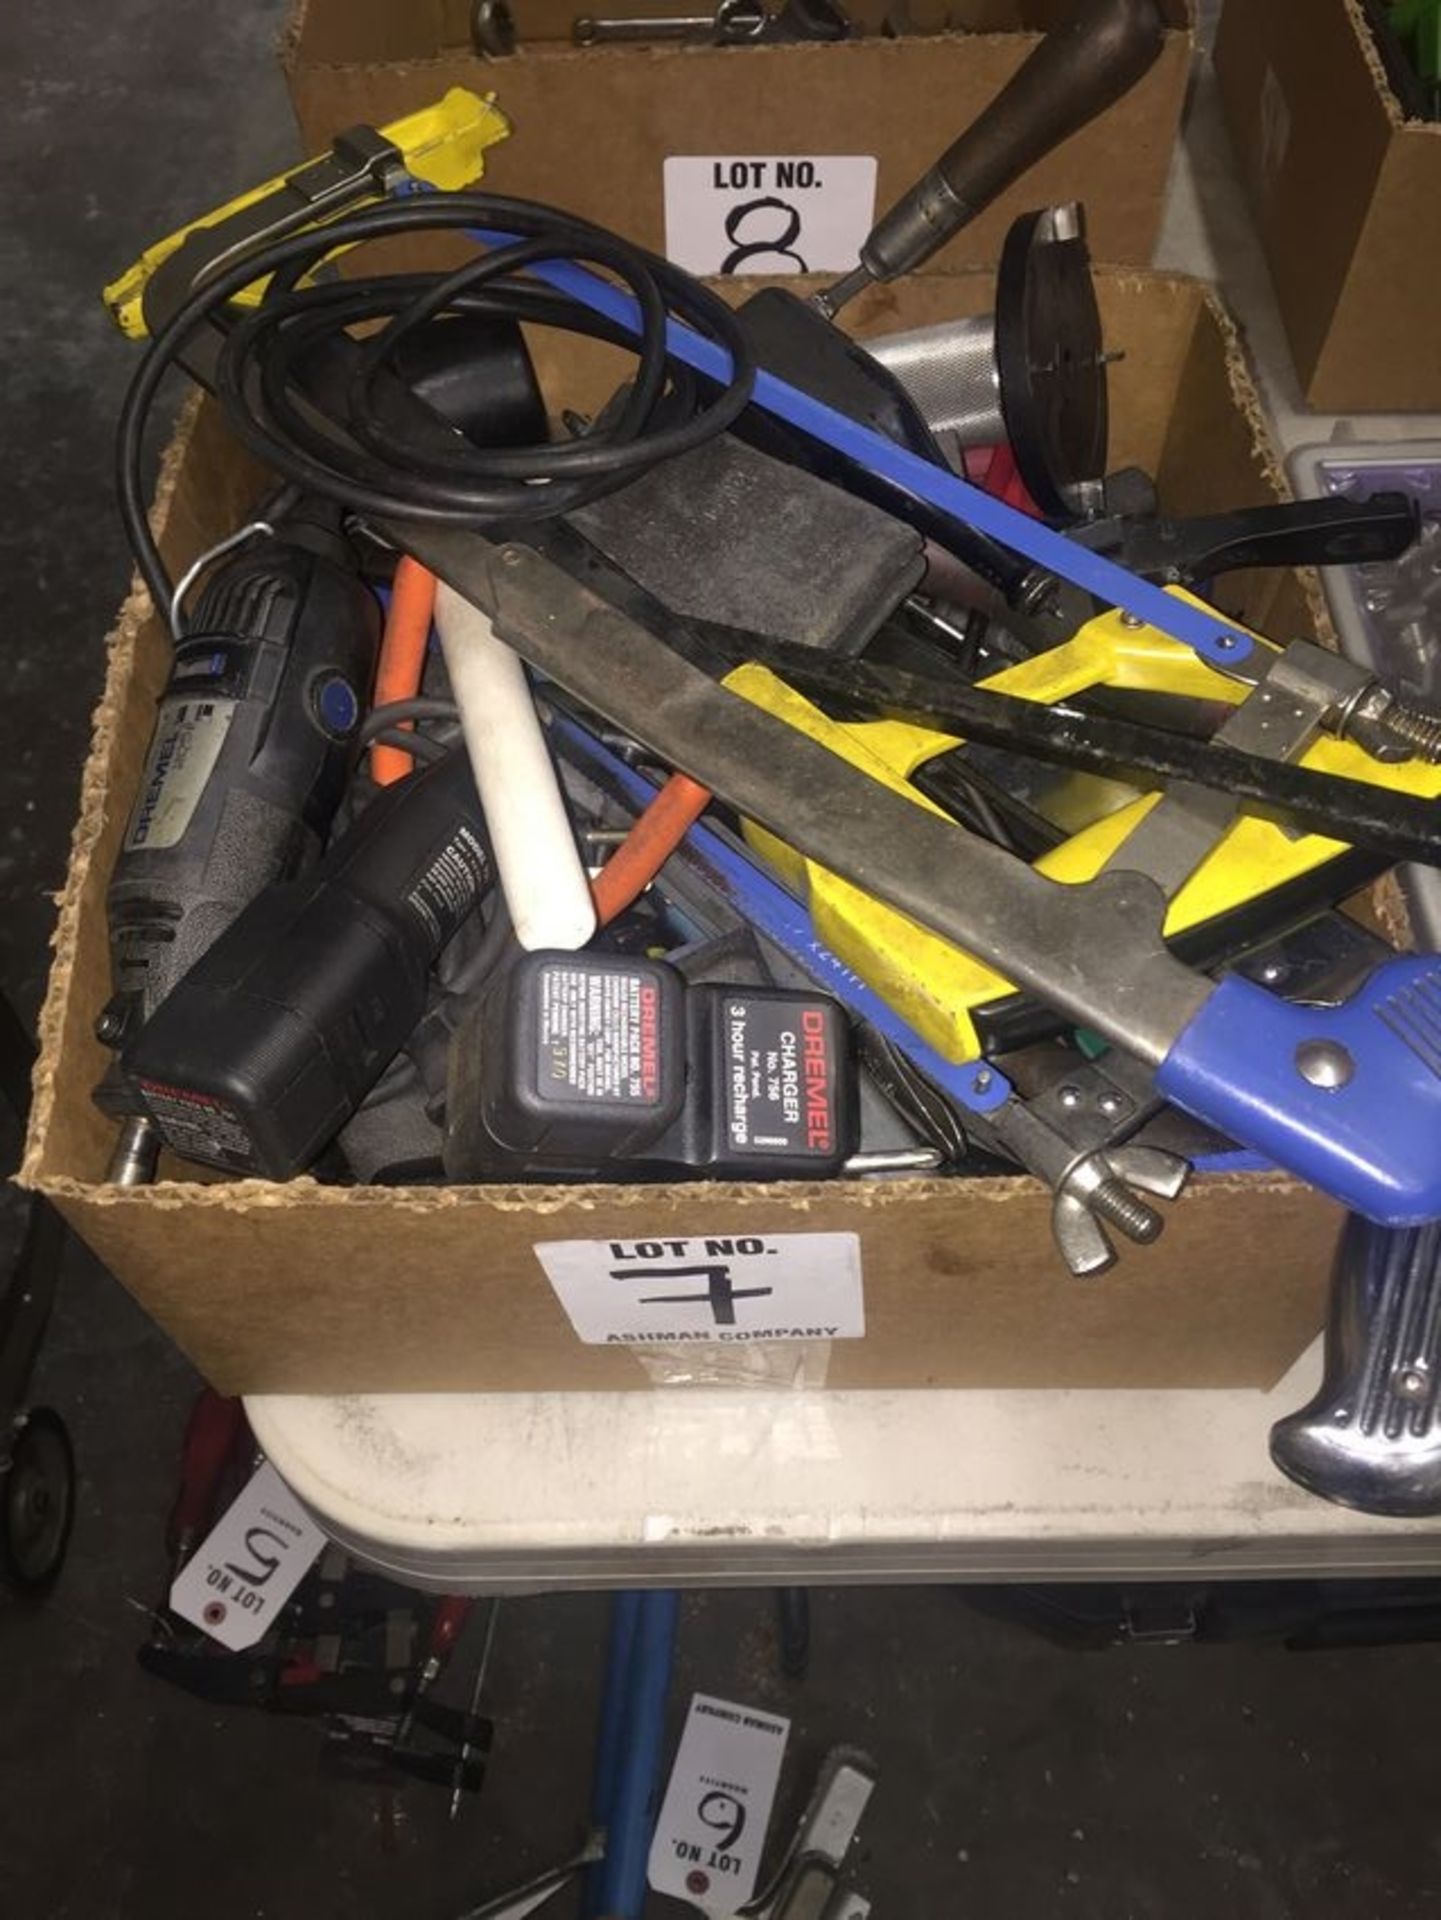 MISC. HAND TOOLS; HACK SAWS, SCREW DRIVERS, MEASURING TAPE, DREMELS, PIPE WRENCHES, ETC.